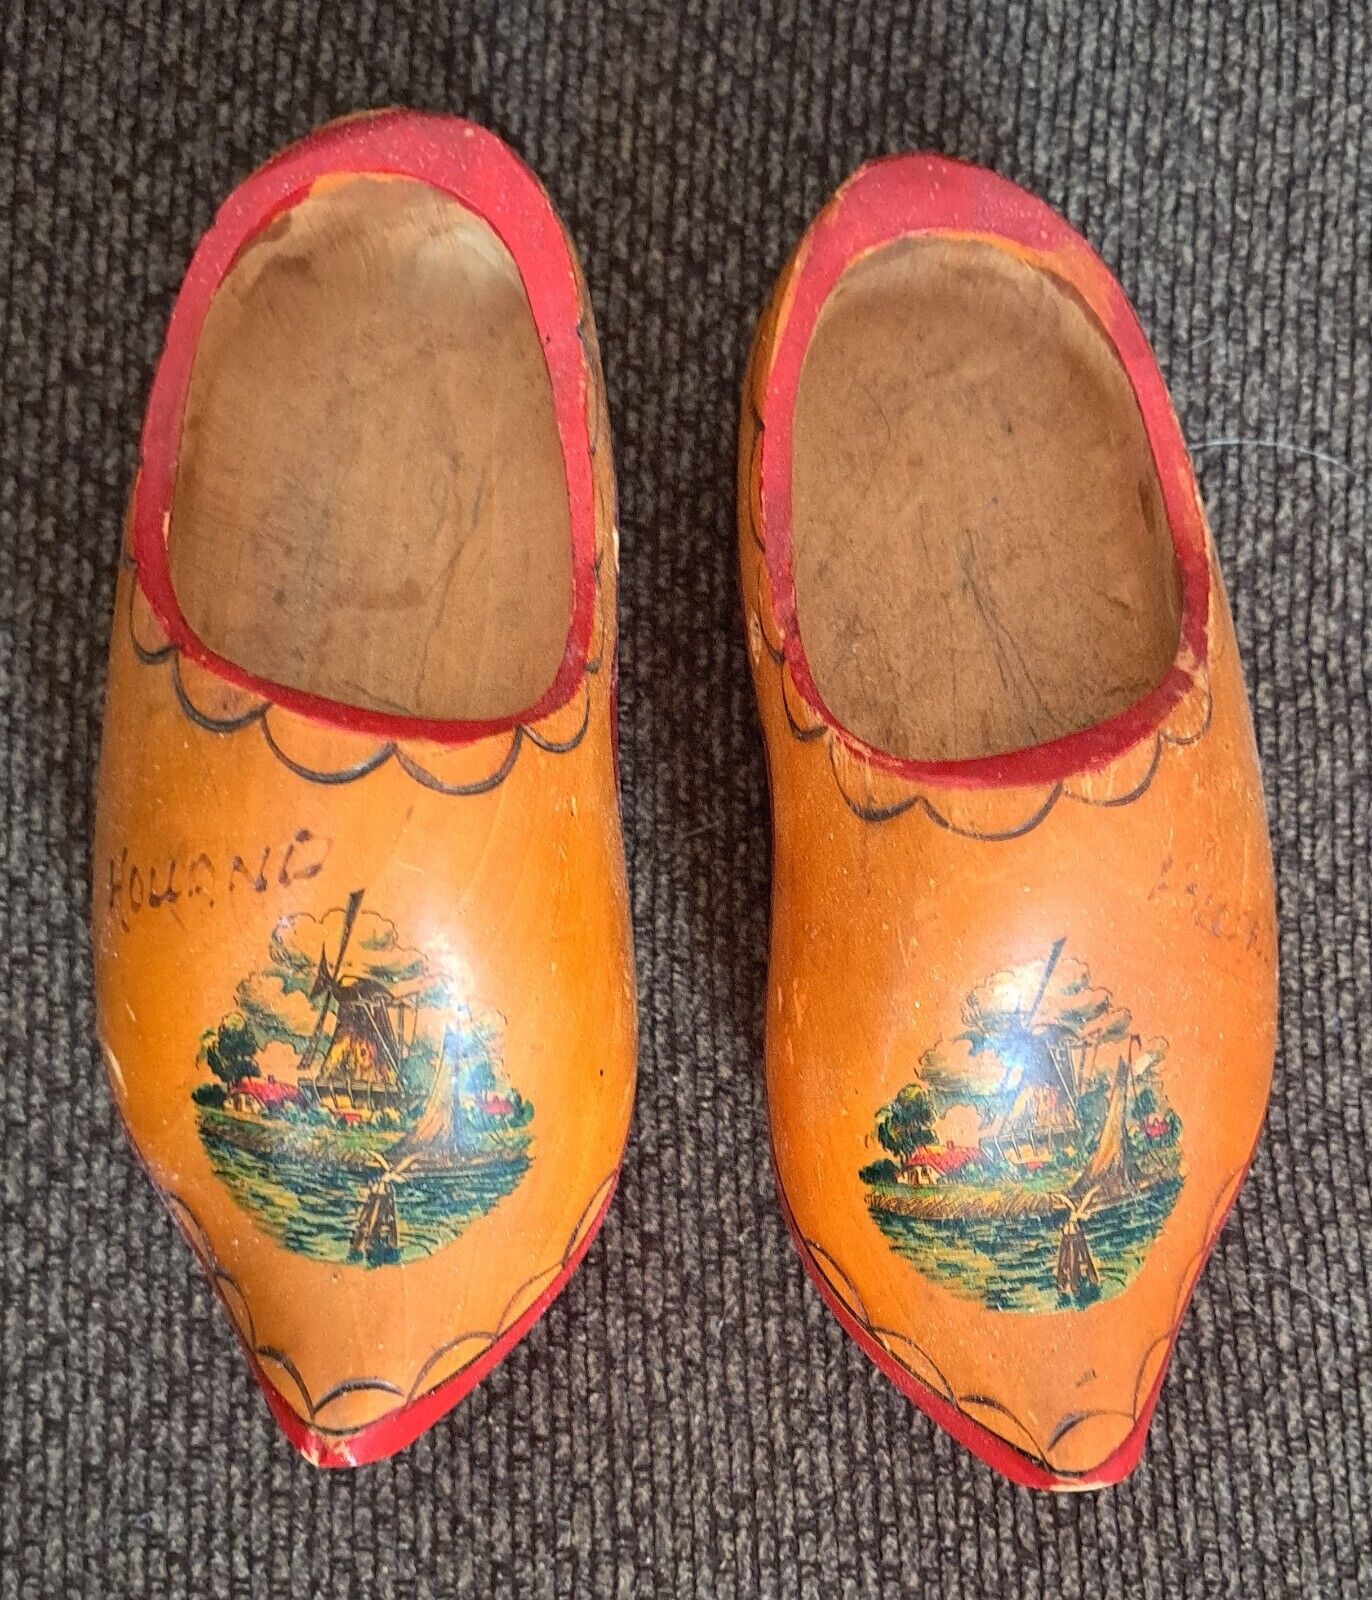 Small Dutch Wooden Shoes Clogs Holland Hand Painted Vintage Wood